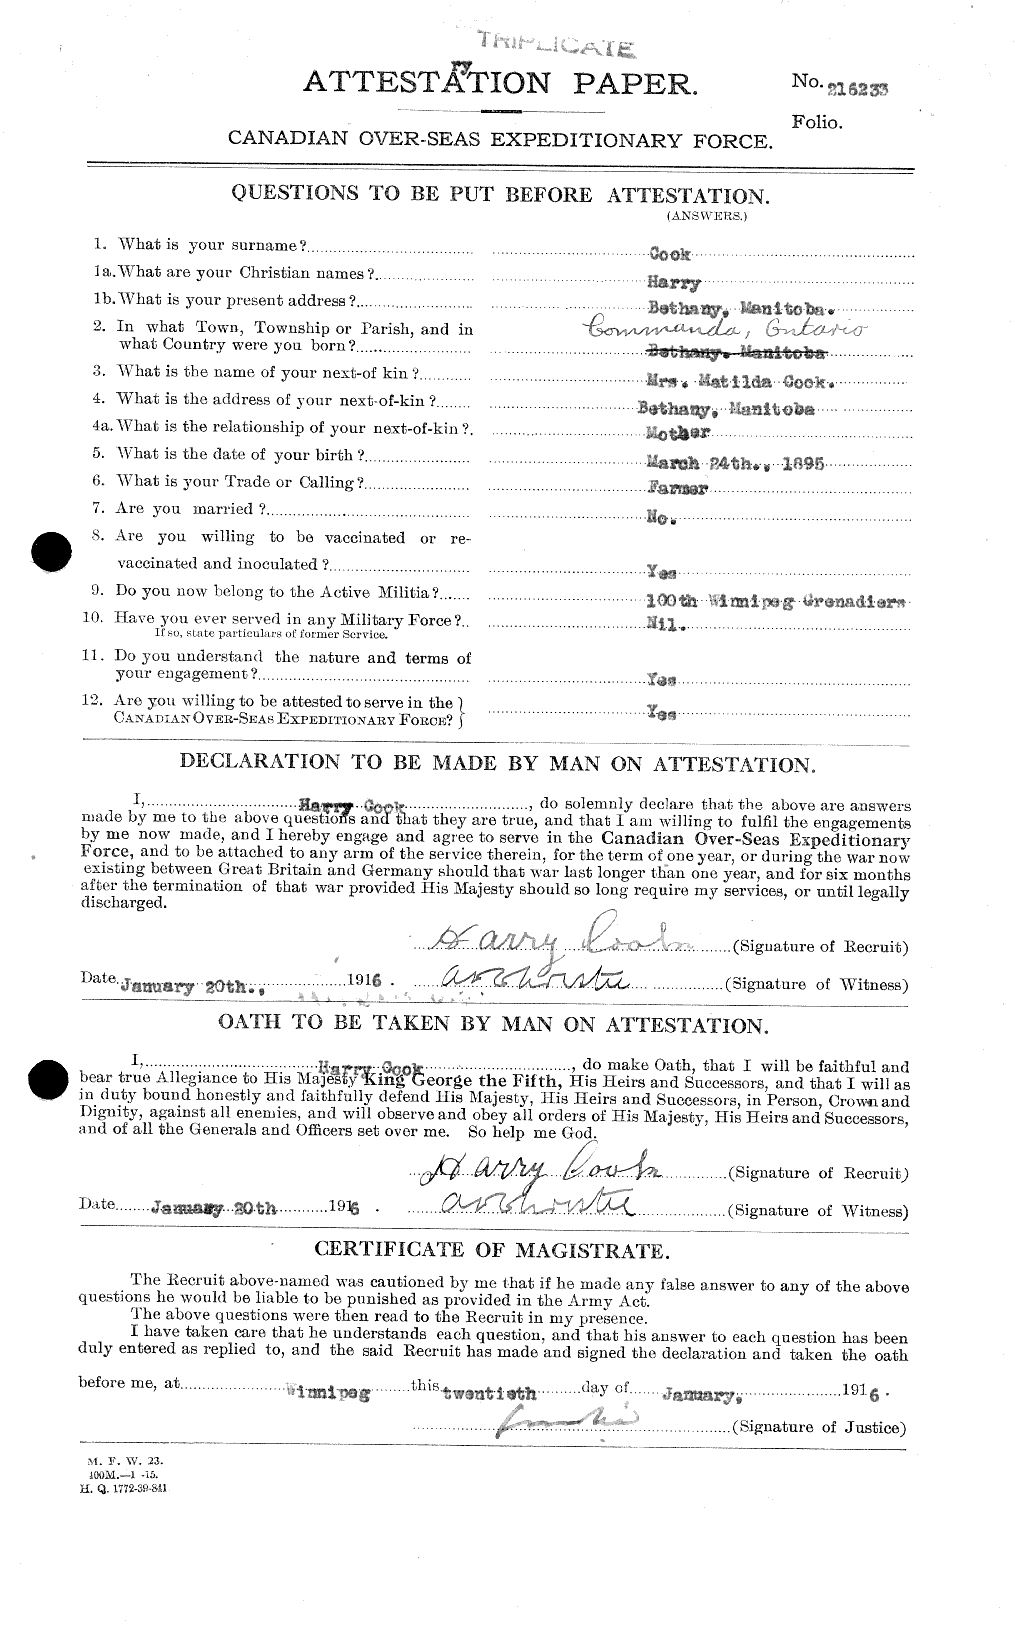 Personnel Records of the First World War - CEF 038812a